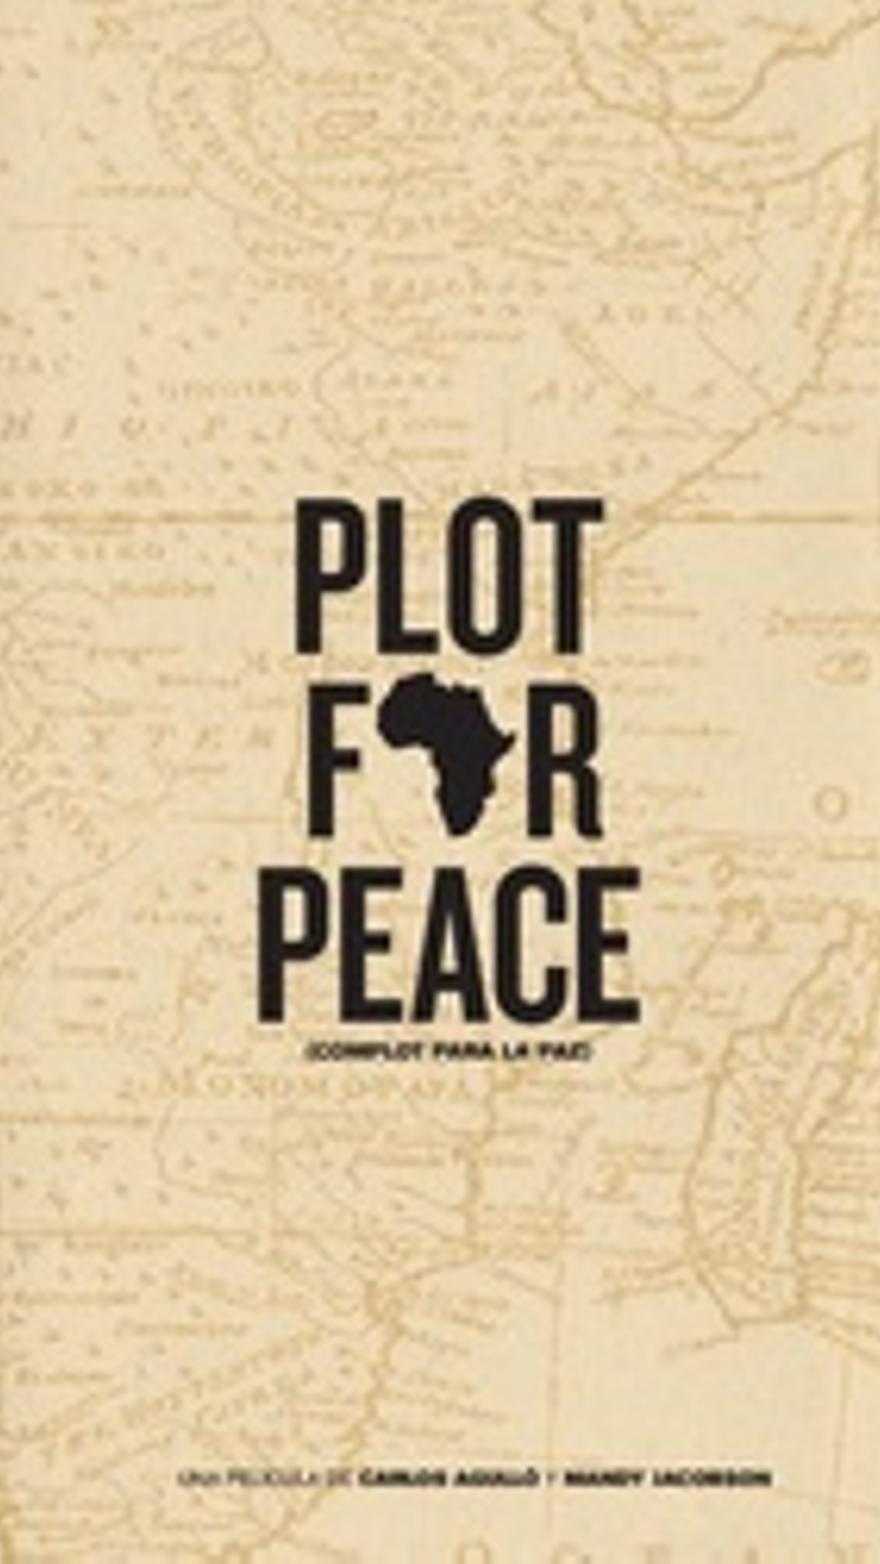 Plot for peace